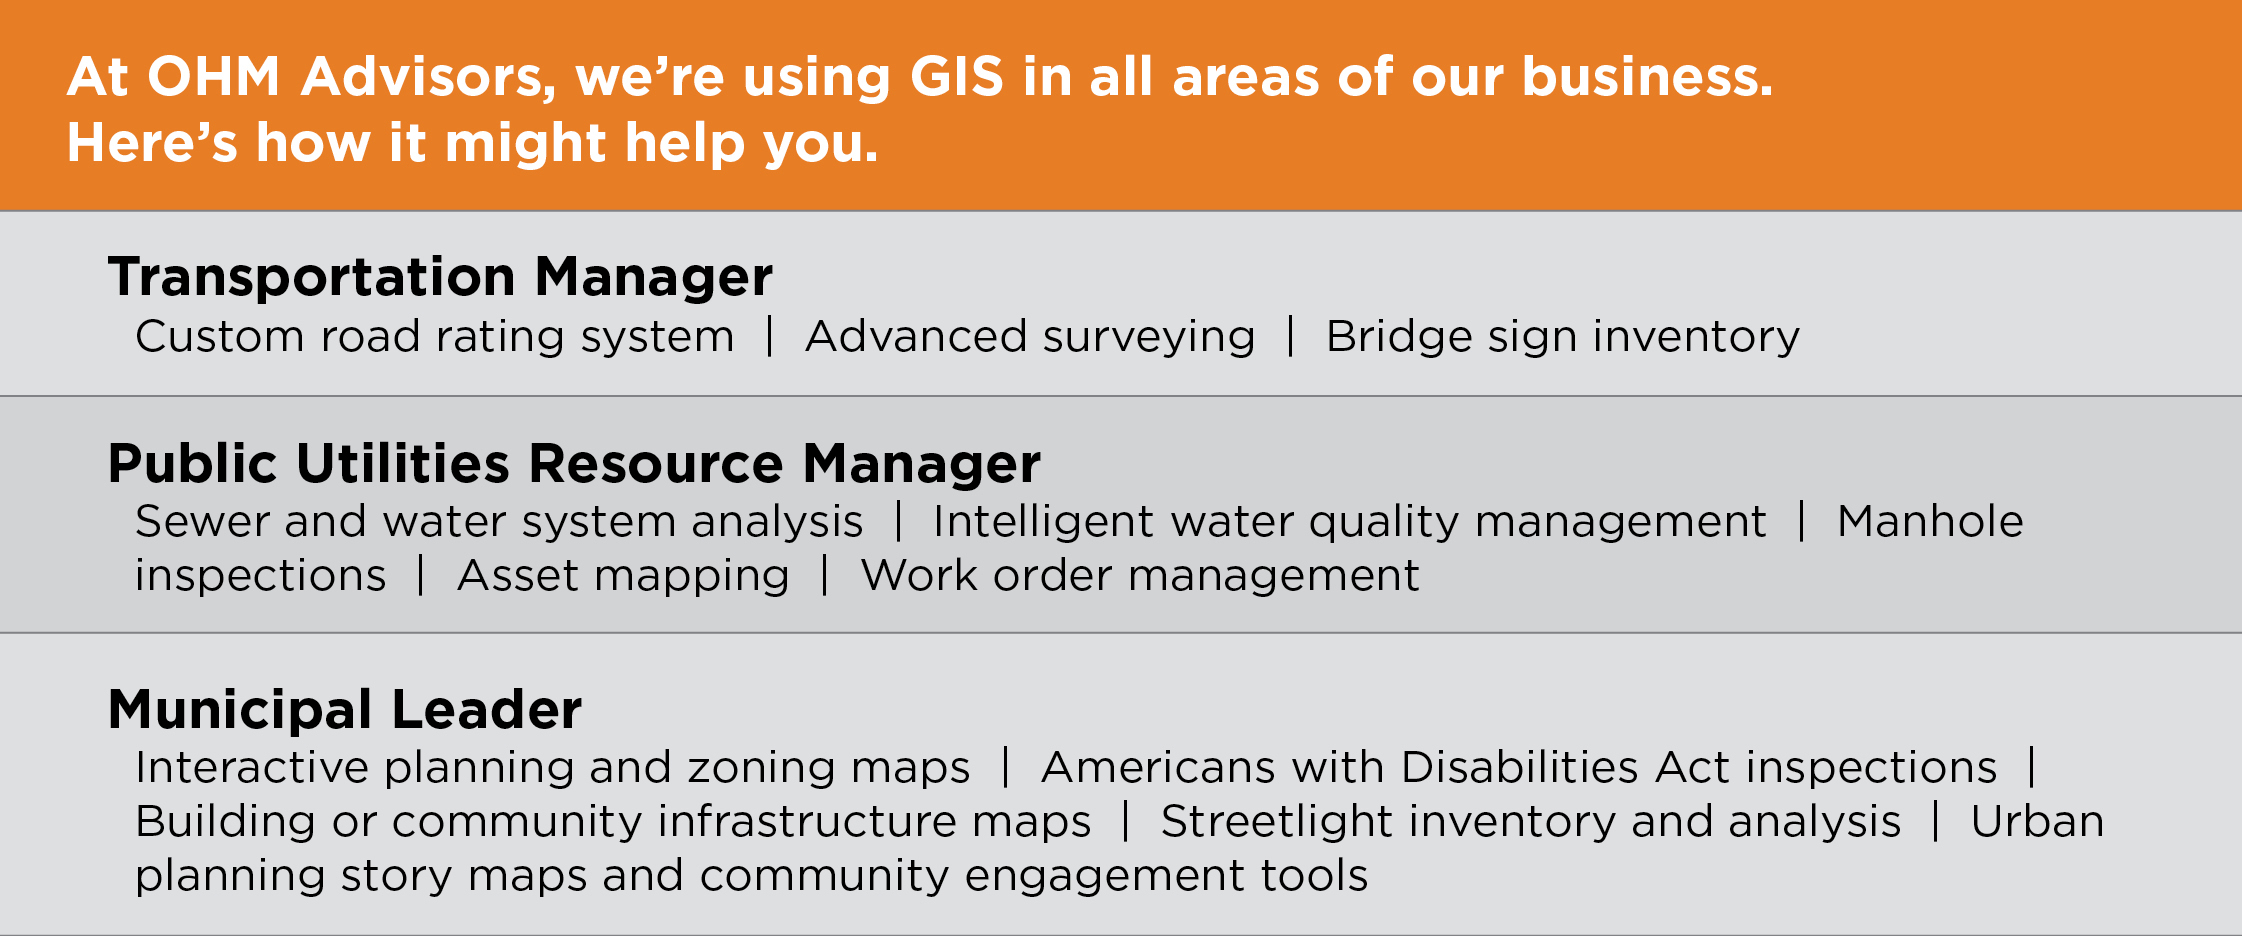 Infographic about the many applications for GIS for professionals in multiple industries.